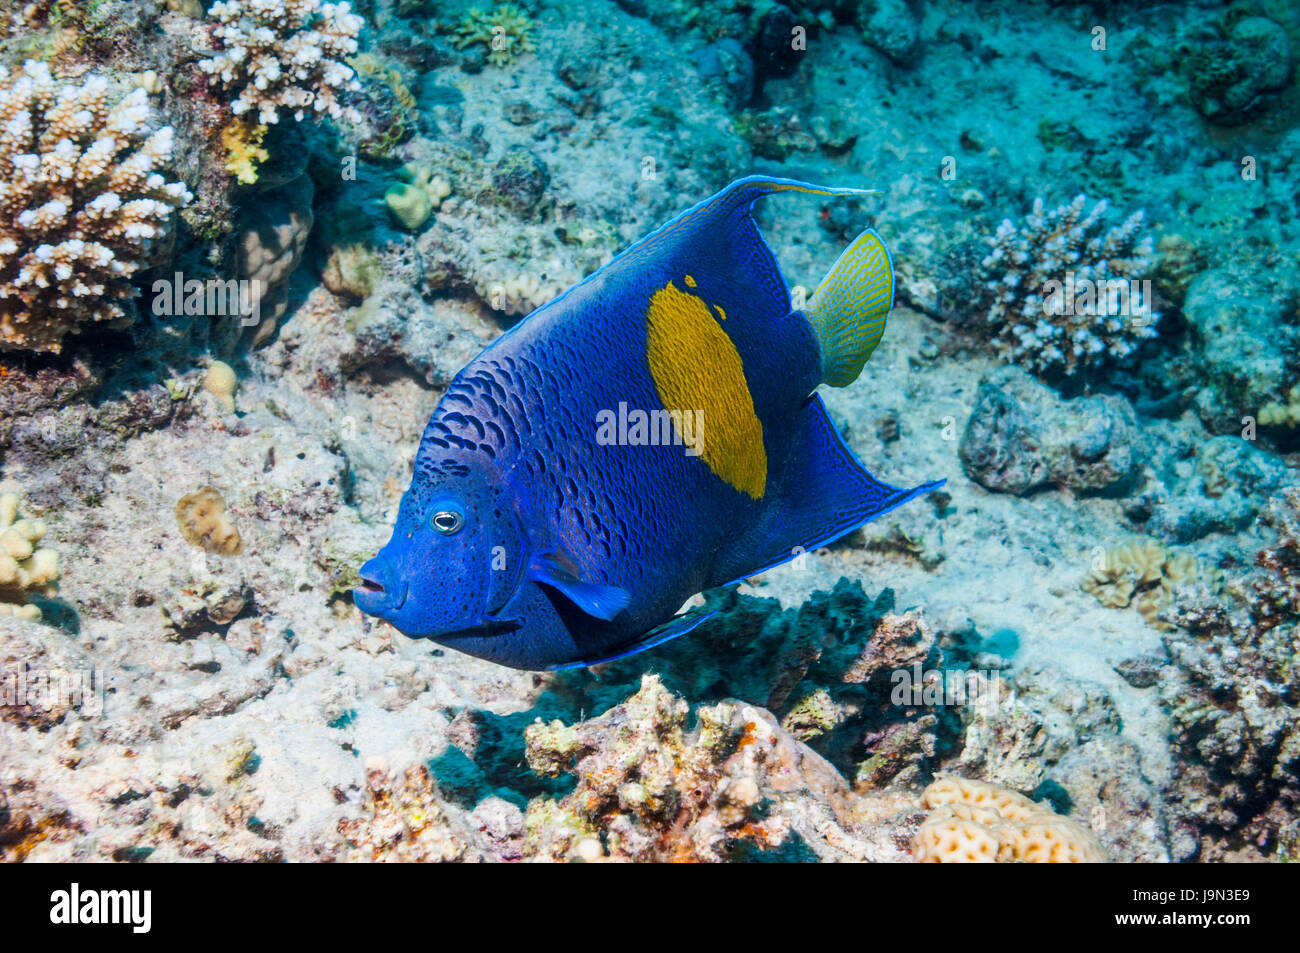 Angelfish Pomacanthus maculosus Yellowbar []. L'Egypte, Mer Rouge. Banque D'Images